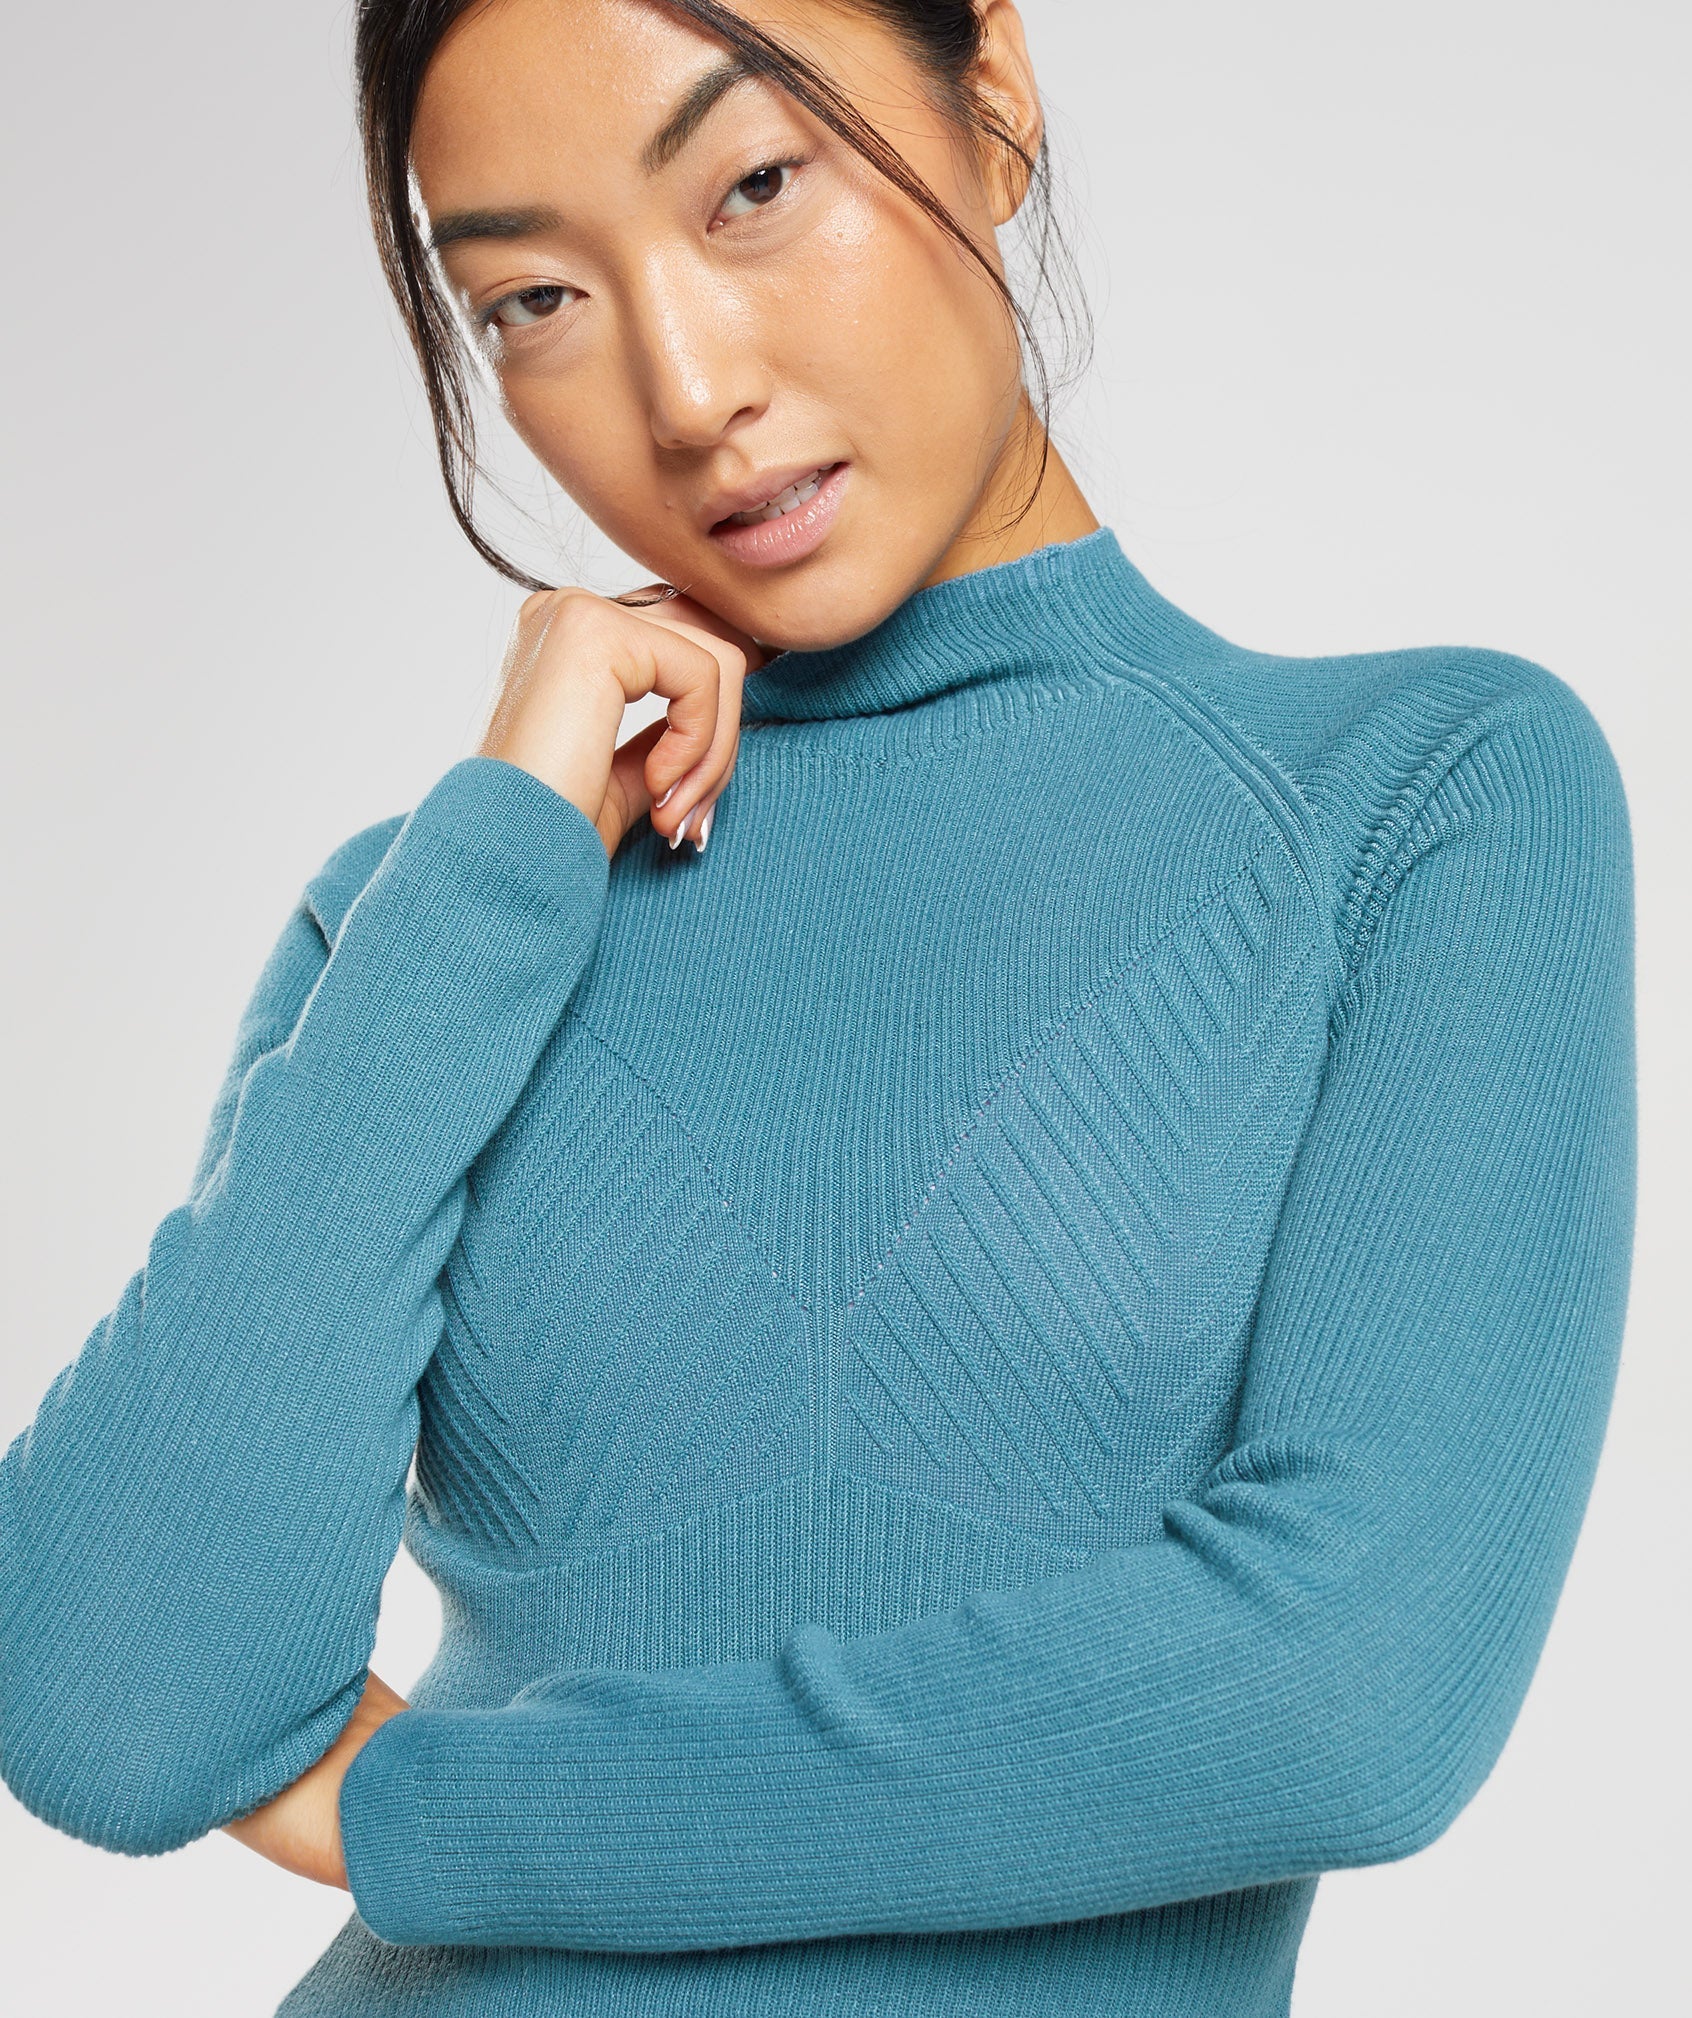 Pause Knitwear Long Sleeve Top in Charred Blue/Tame Blue - view 7